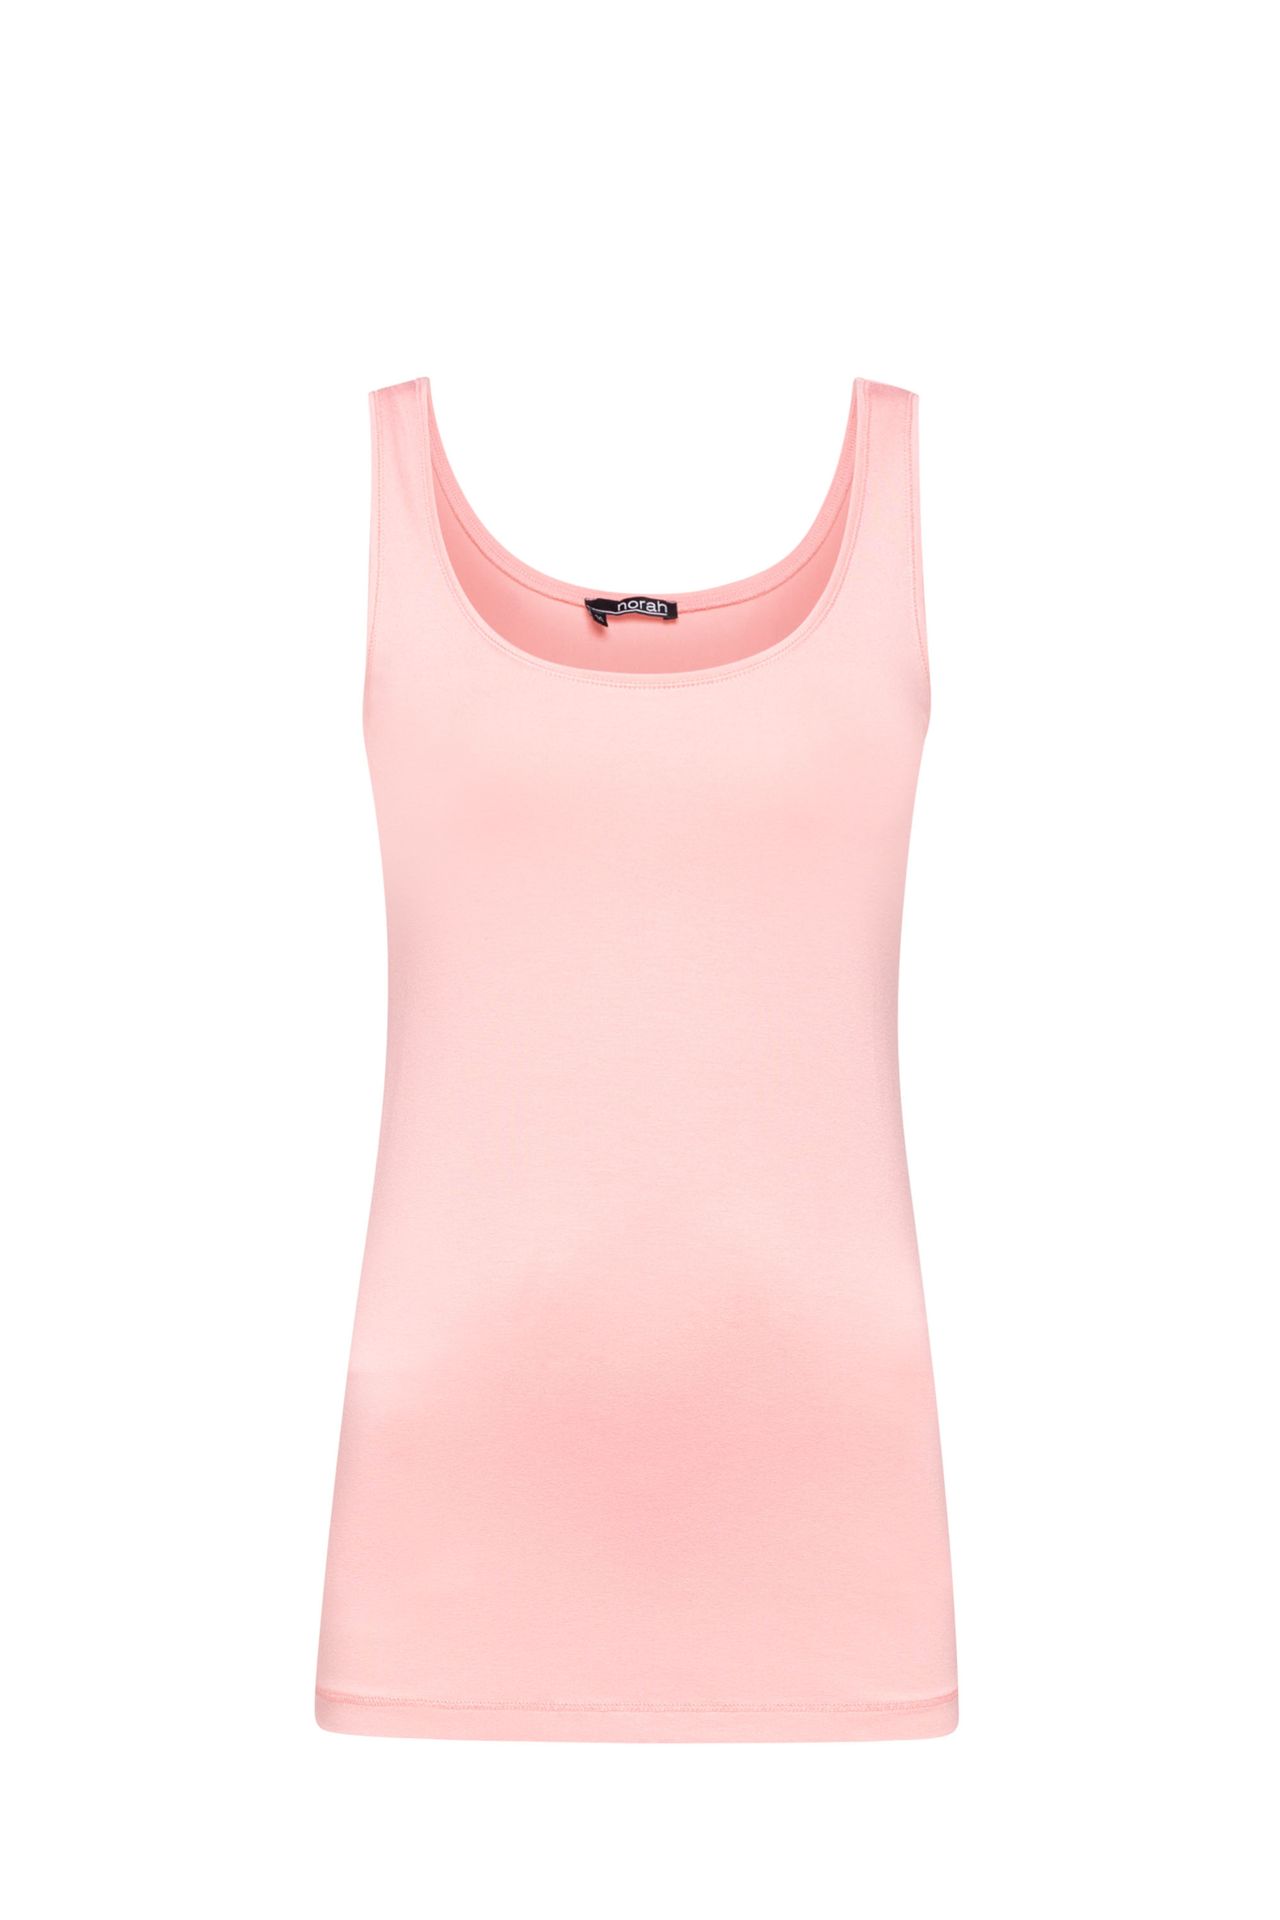 Norah Top Marianne roze baby pink 212247-902